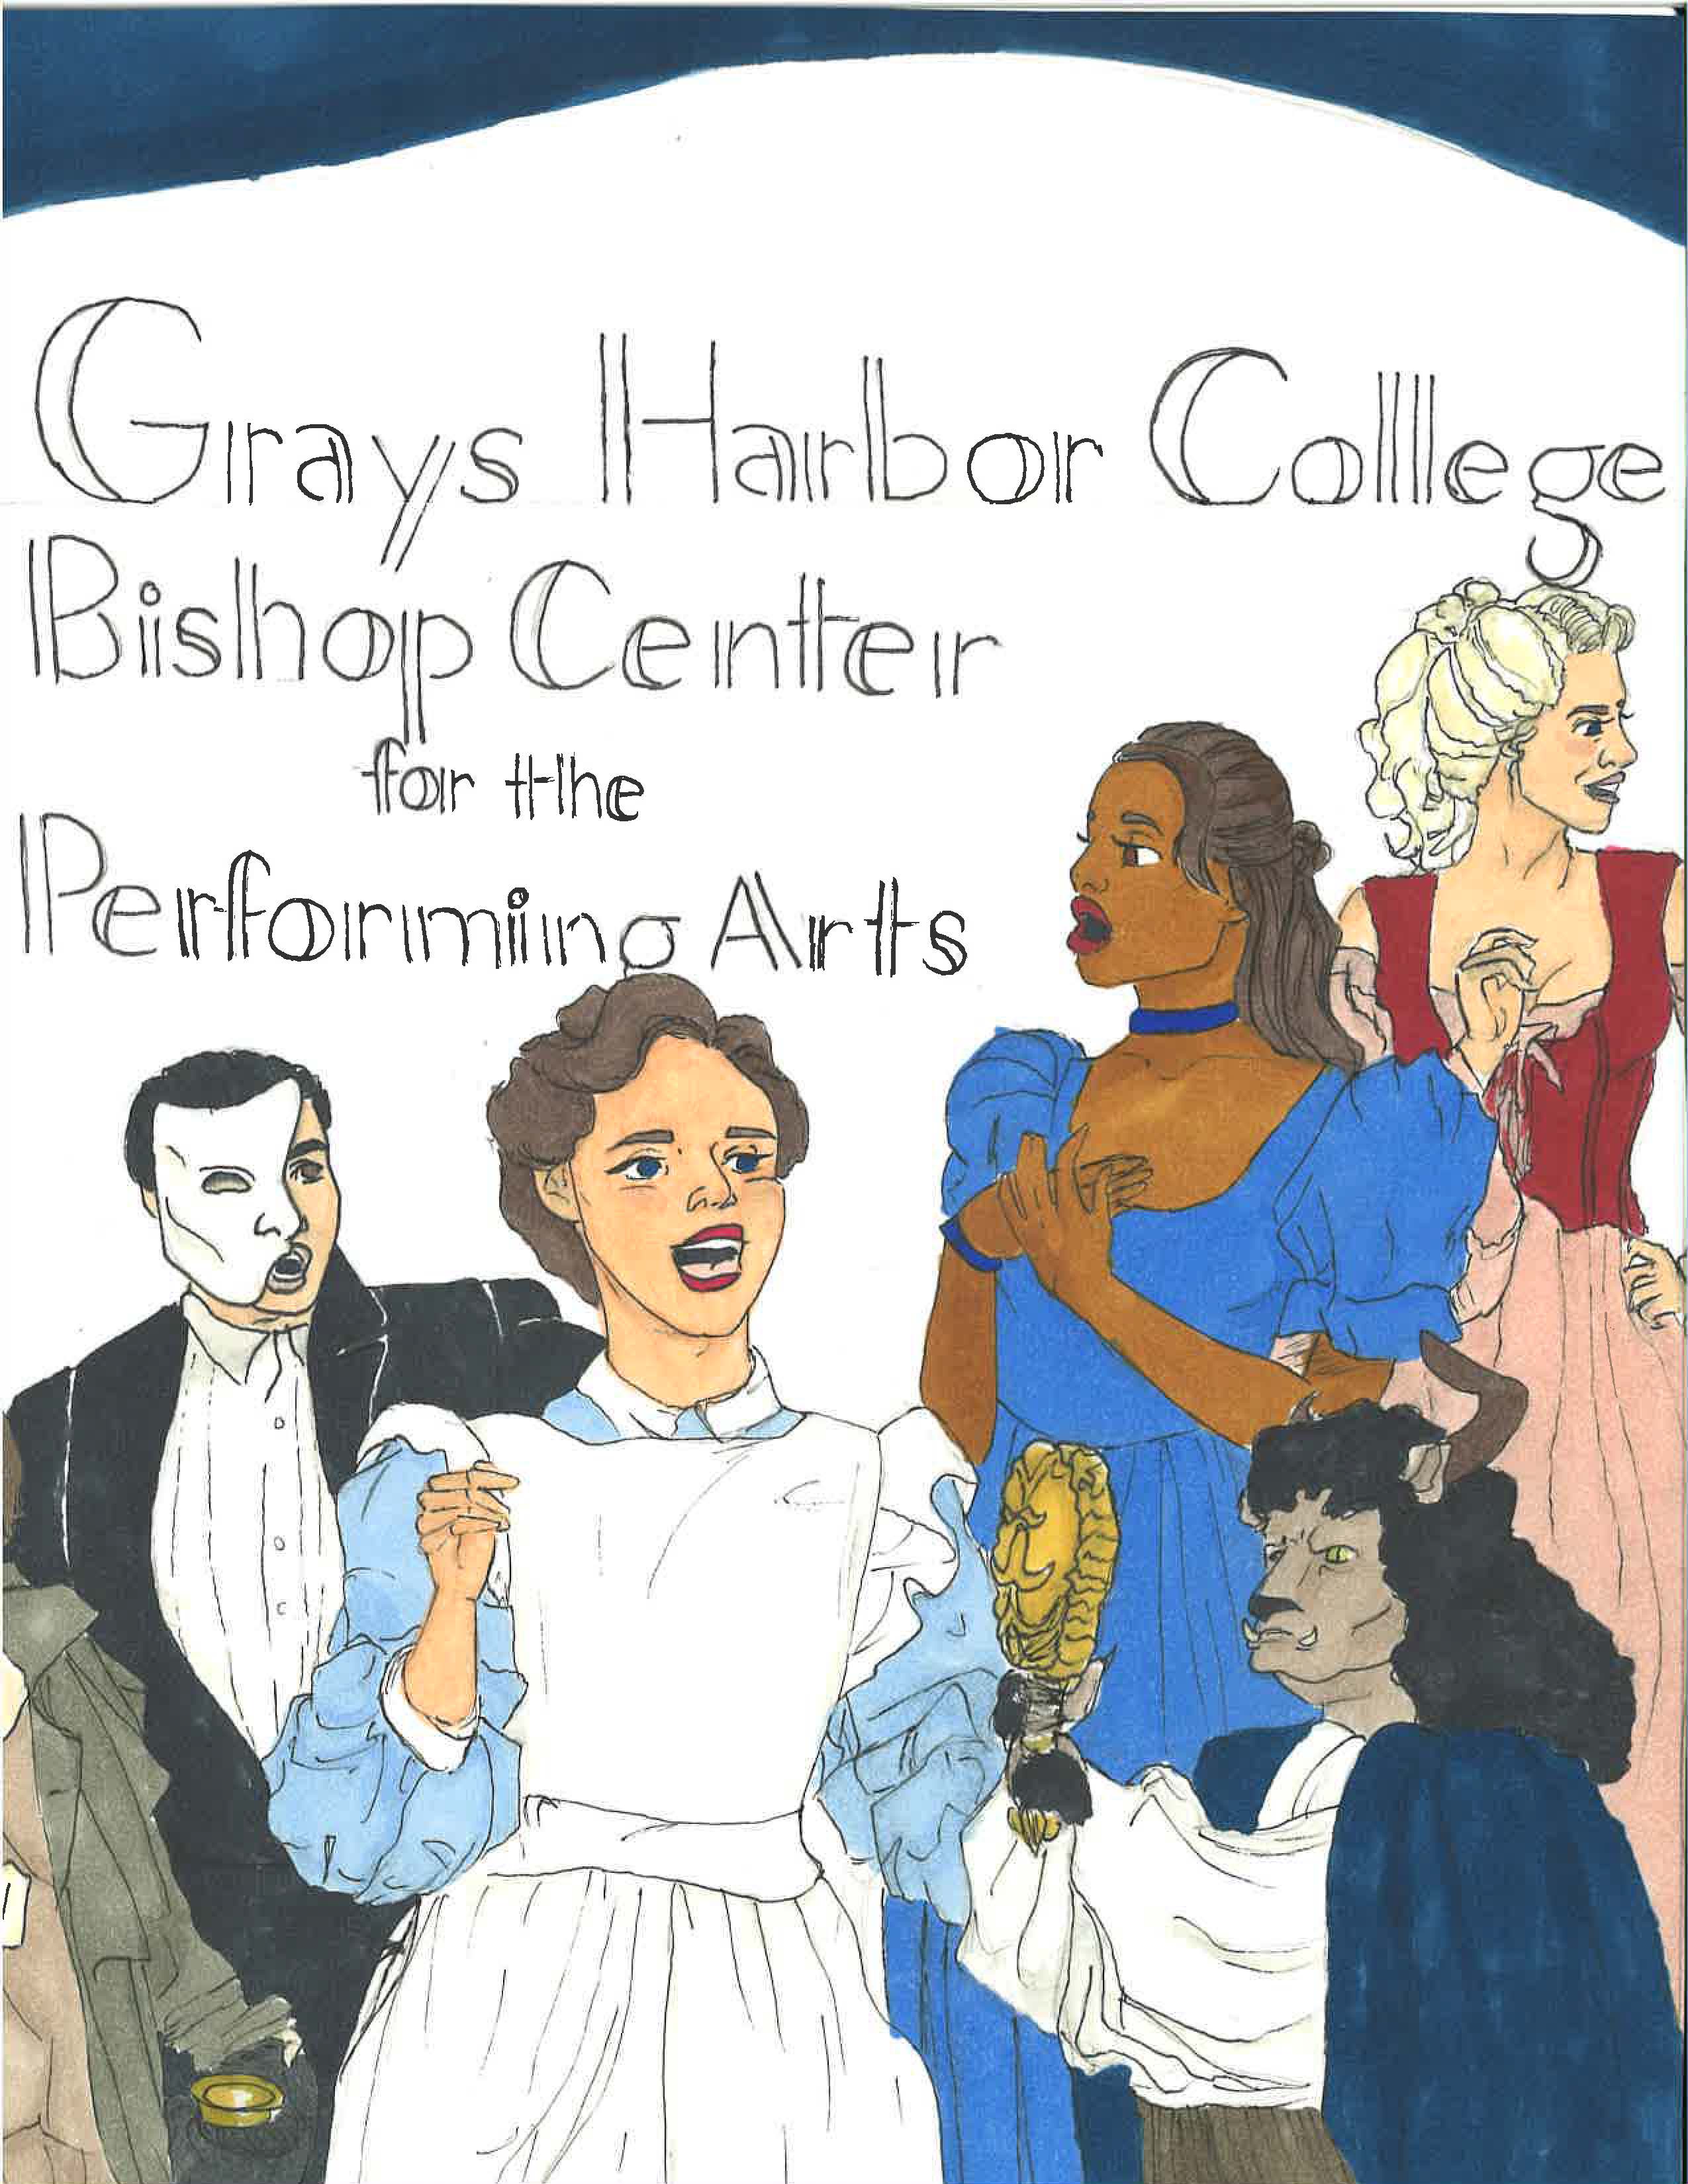 Actors in costumes from the various theater productions performed at the Bishop Center over the past 25 years